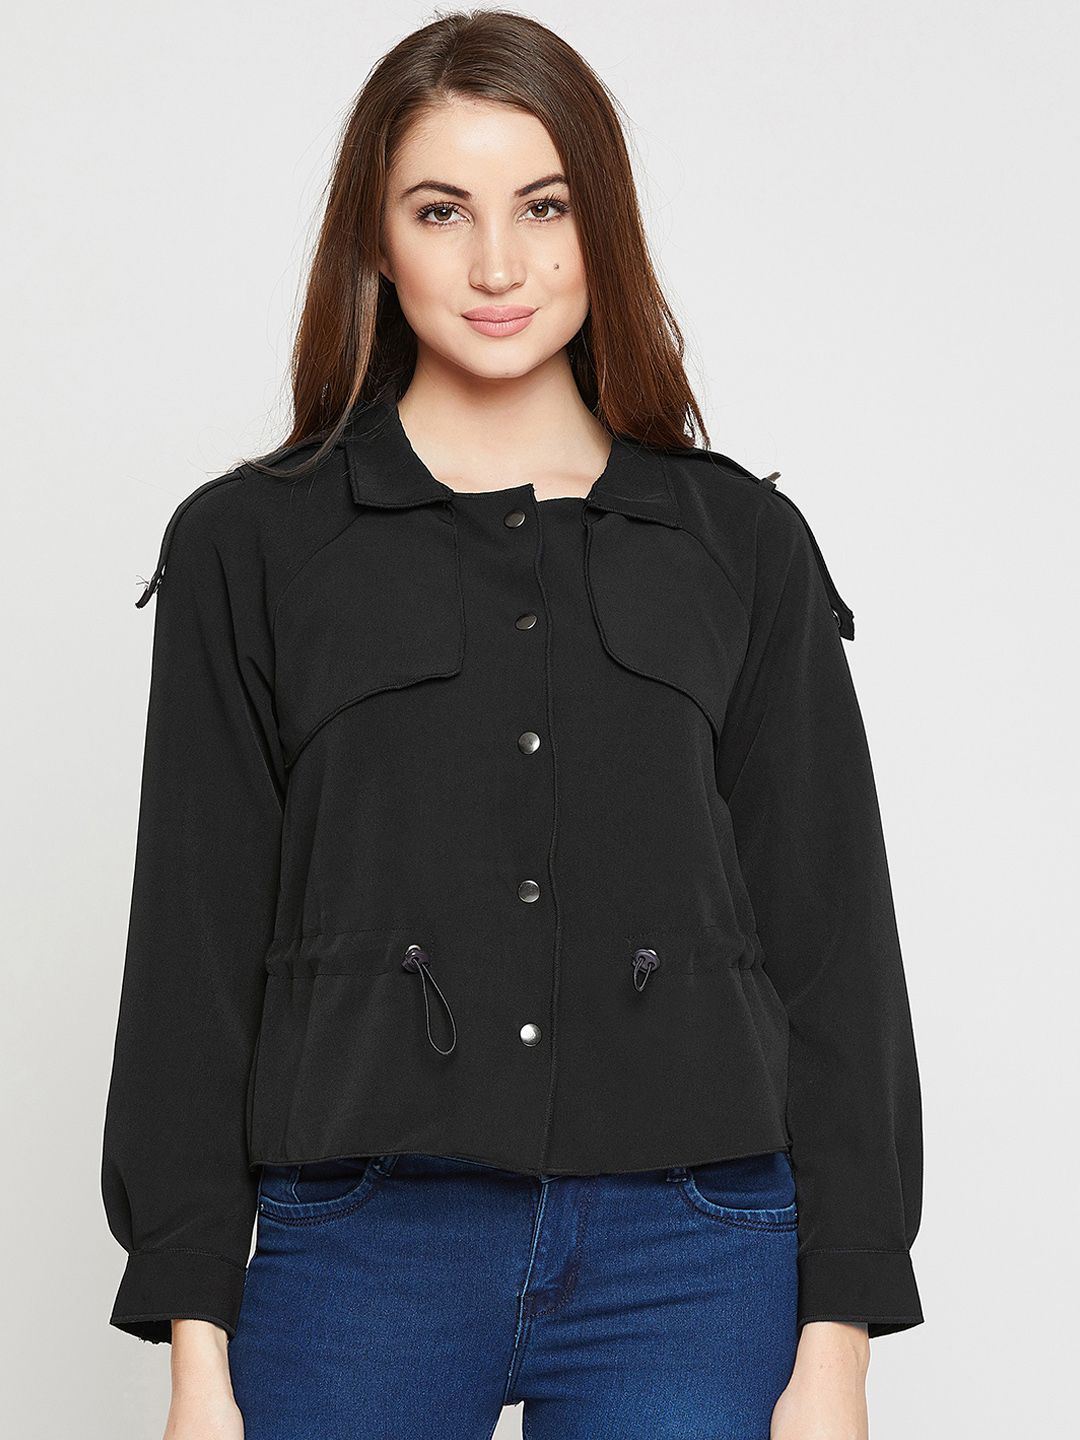 Marie Claire Women Black Solid Tailored Jacket Price in India